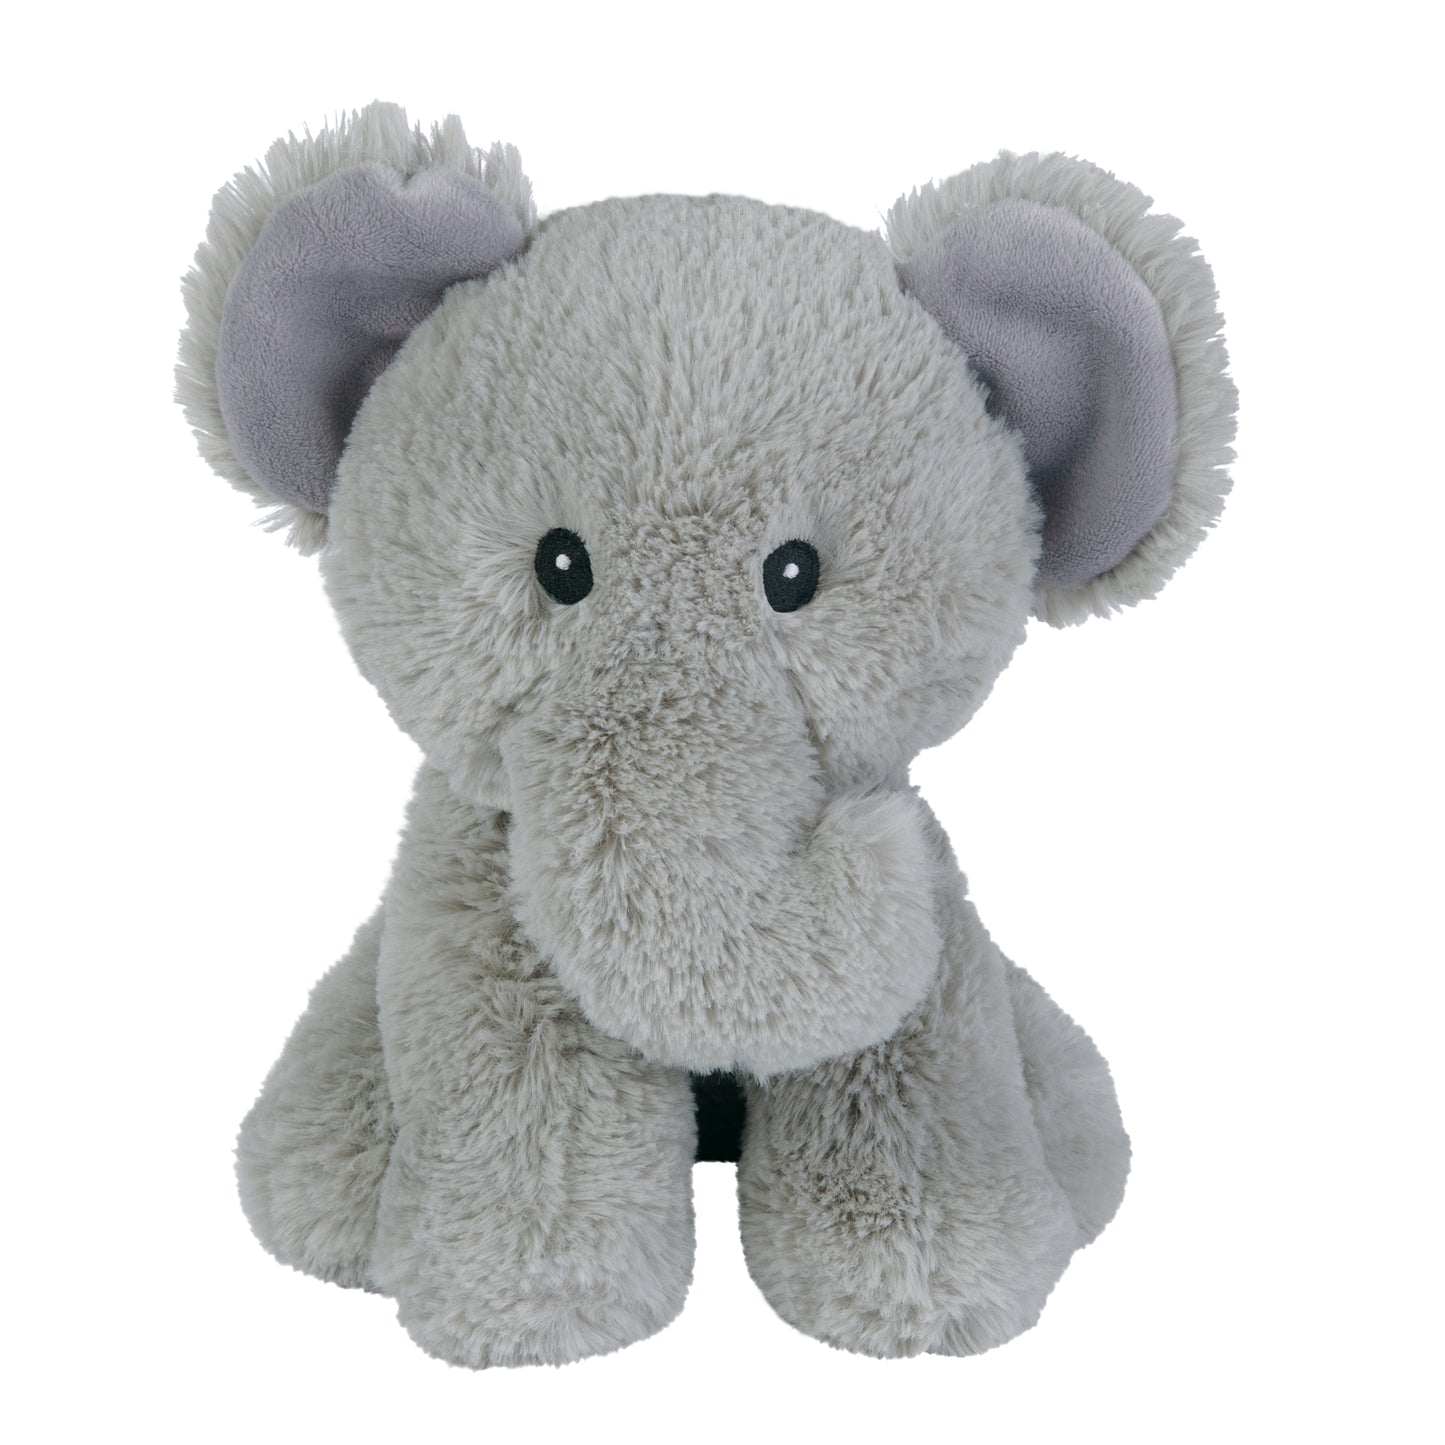 Elephant Plush Toy- 9 inch; made with super soft gray plush material.